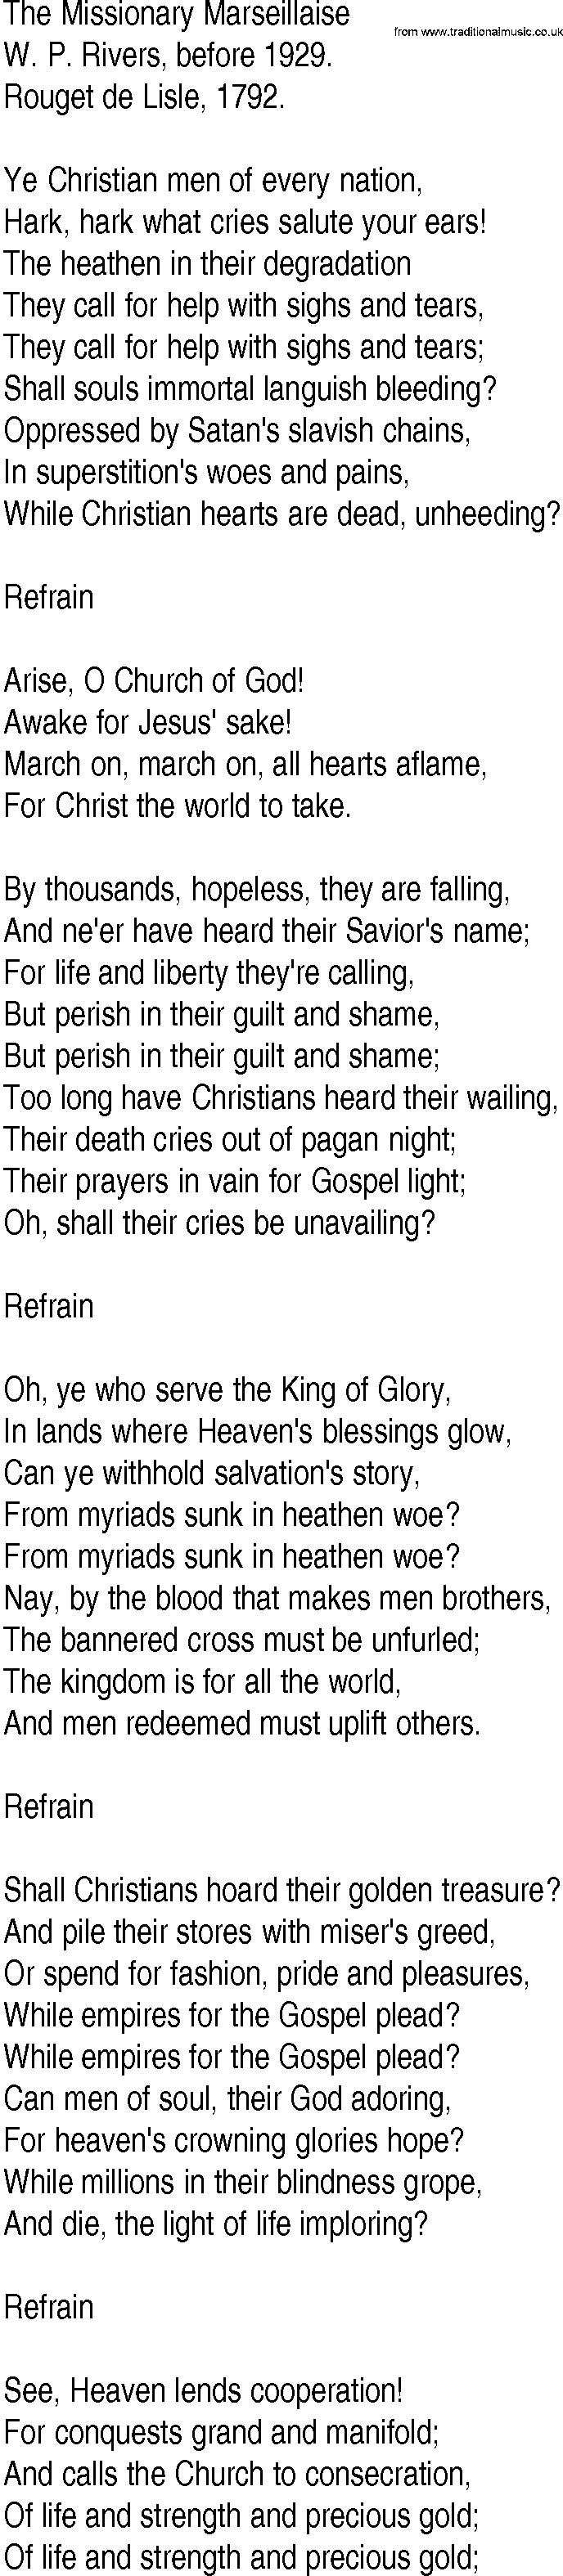 Hymn and Gospel Song: The Missionary Marseillaise by W P Rivers before lyrics